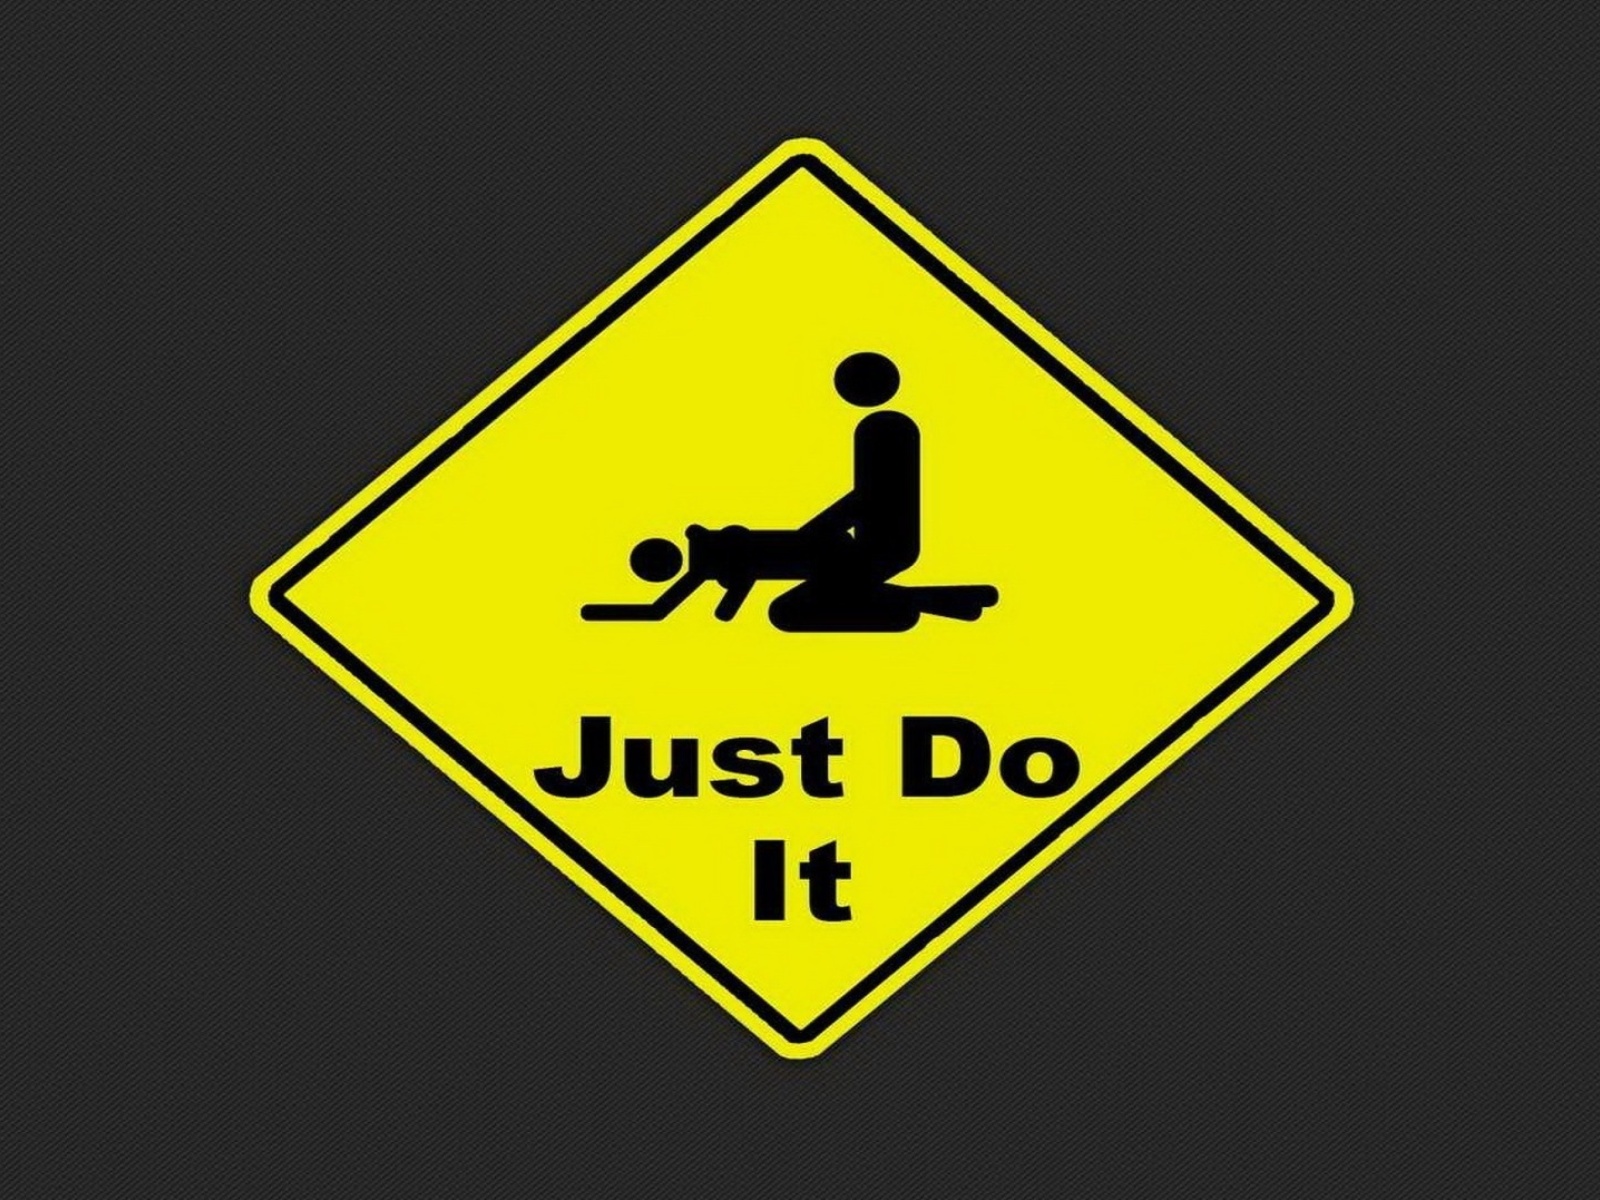 Das Just Do It Funny Sign Wallpaper 1600x1200